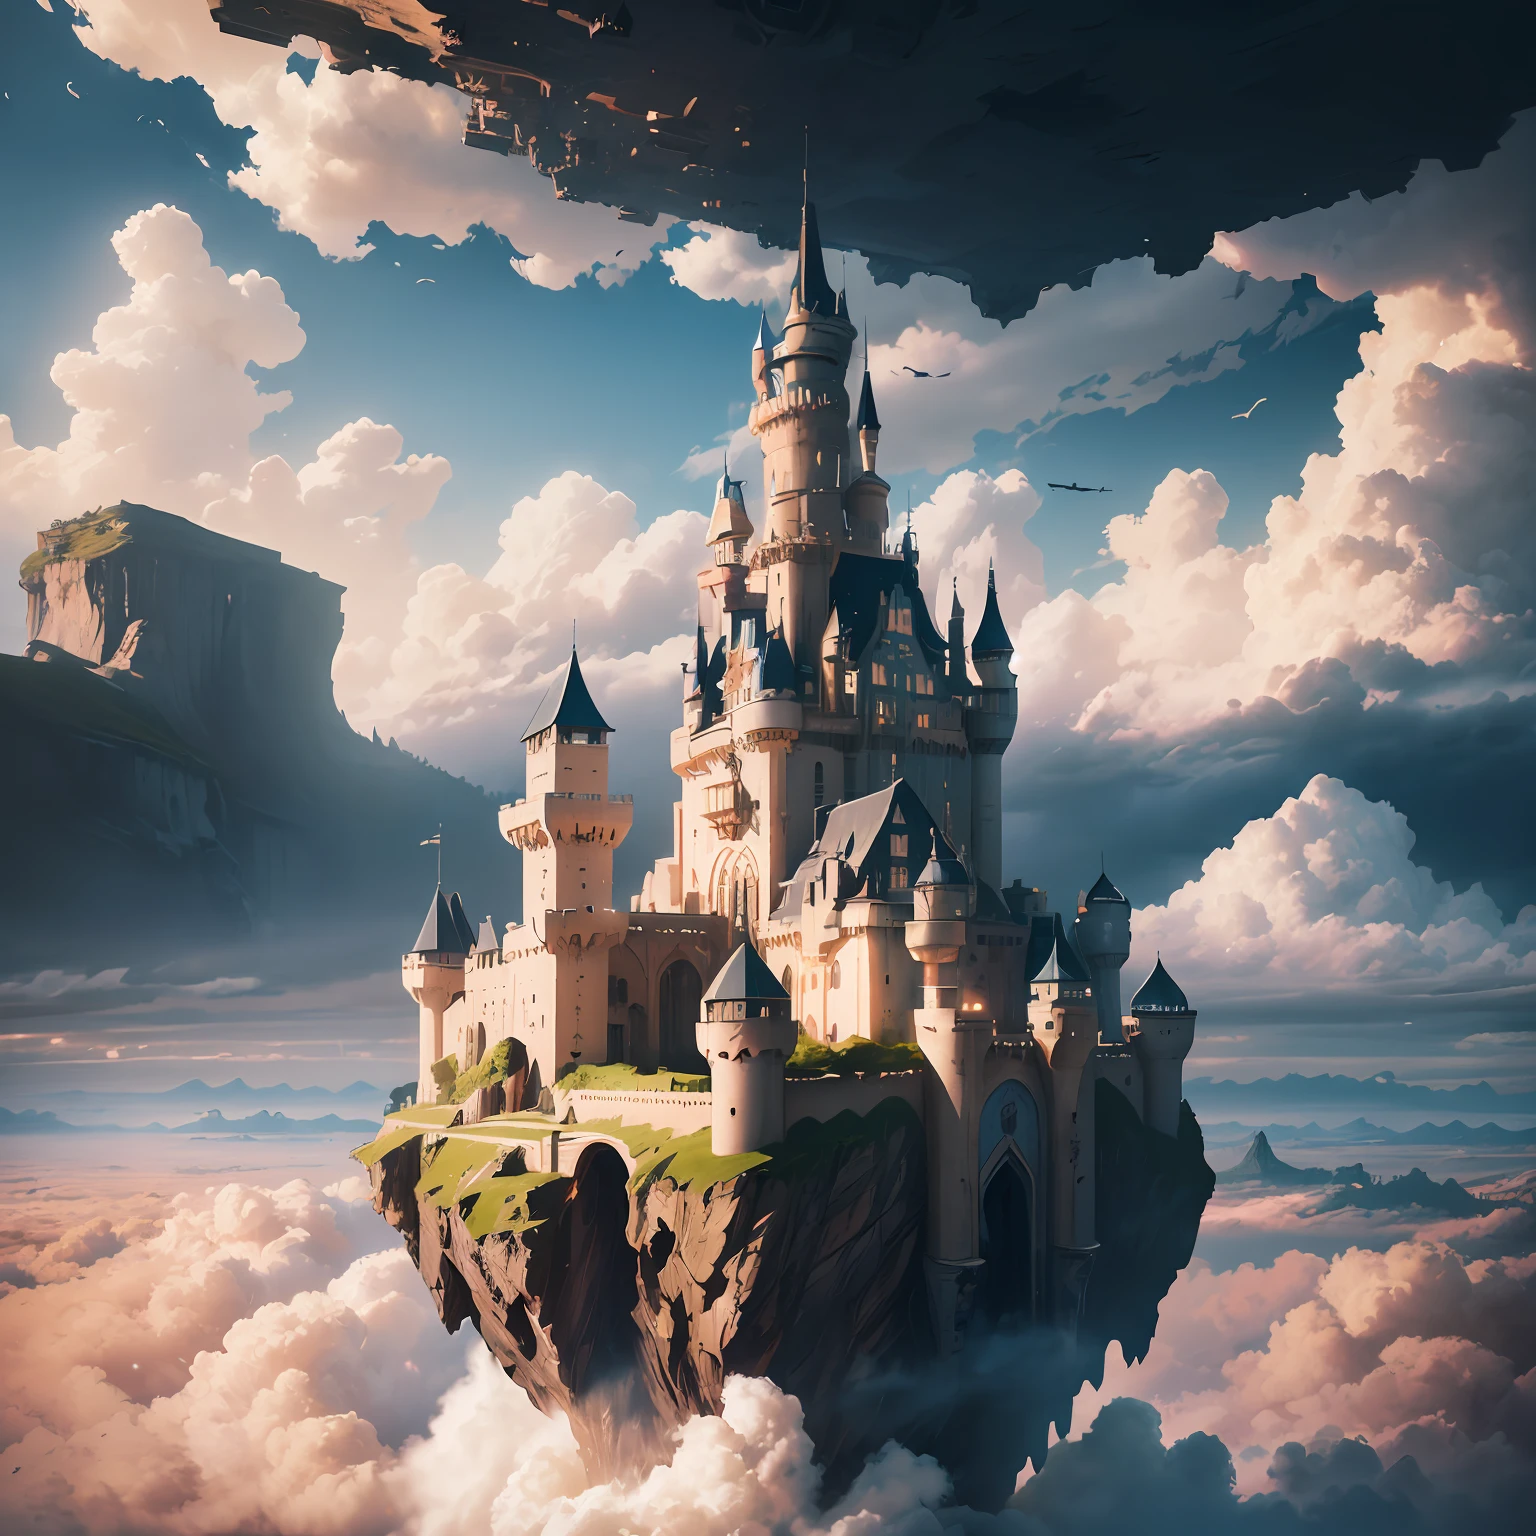 "there's an island floating in the sky among the cloud with castle on it, the castle is full of gear and machinery parts" castle in the sky, floating castle, cloud, (cinematic, 8K, masterpiece, glorious background, dynamic lighting, zoom out, extremely ultra high detail, mesmerizing landscape views)